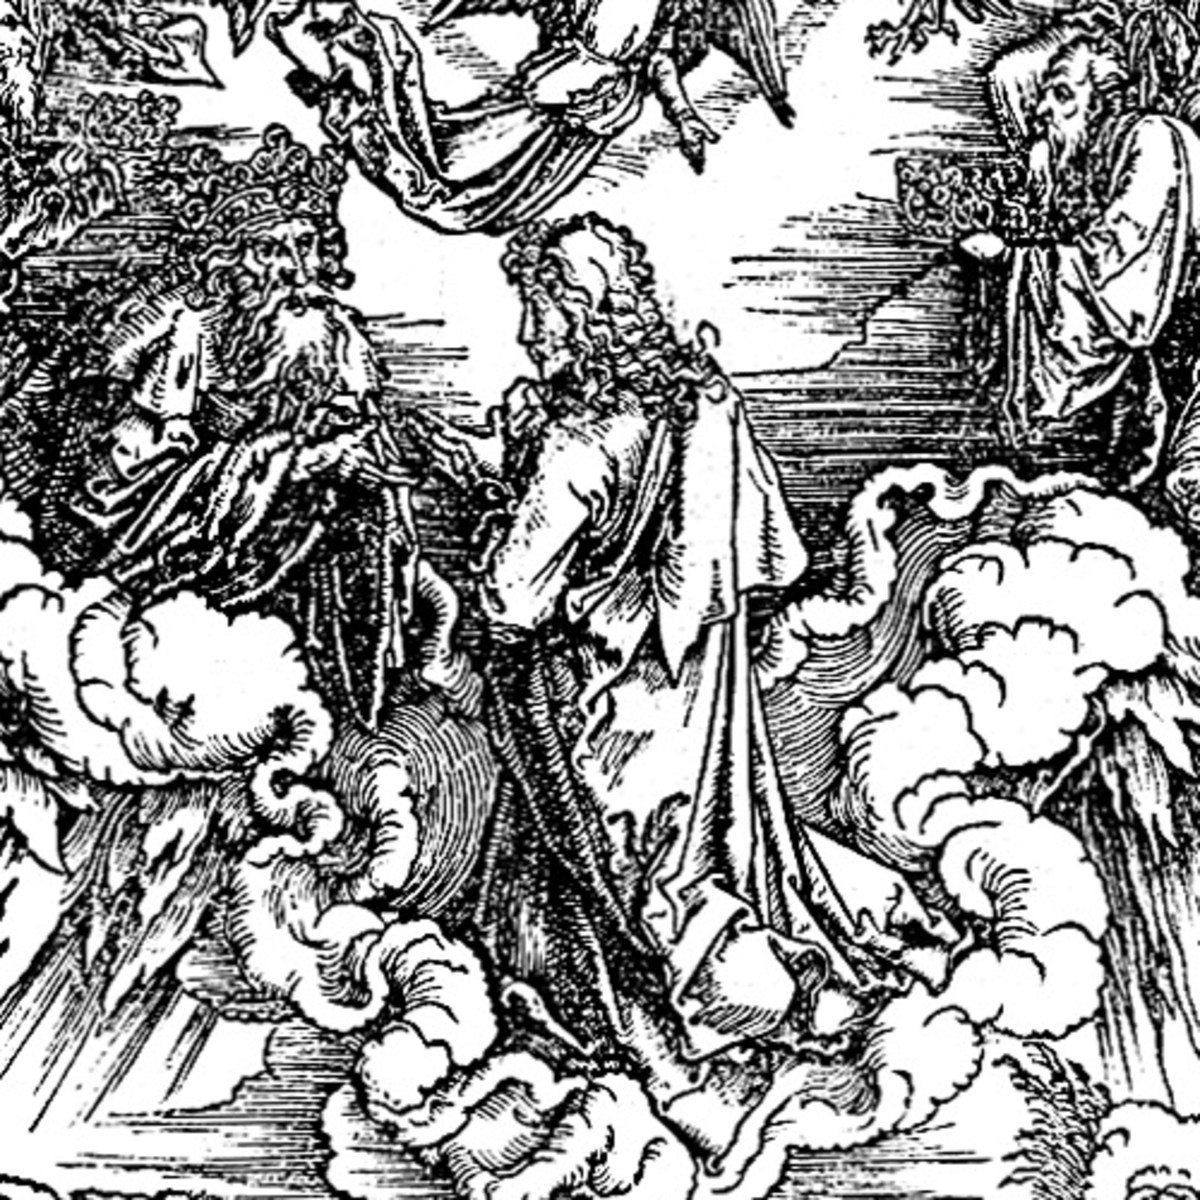 Here we show another portion of "St John and the Twenty-four Elders in Heaven" by Albrecht Durer - this this image, we see St John kneeling before one of the Elders.